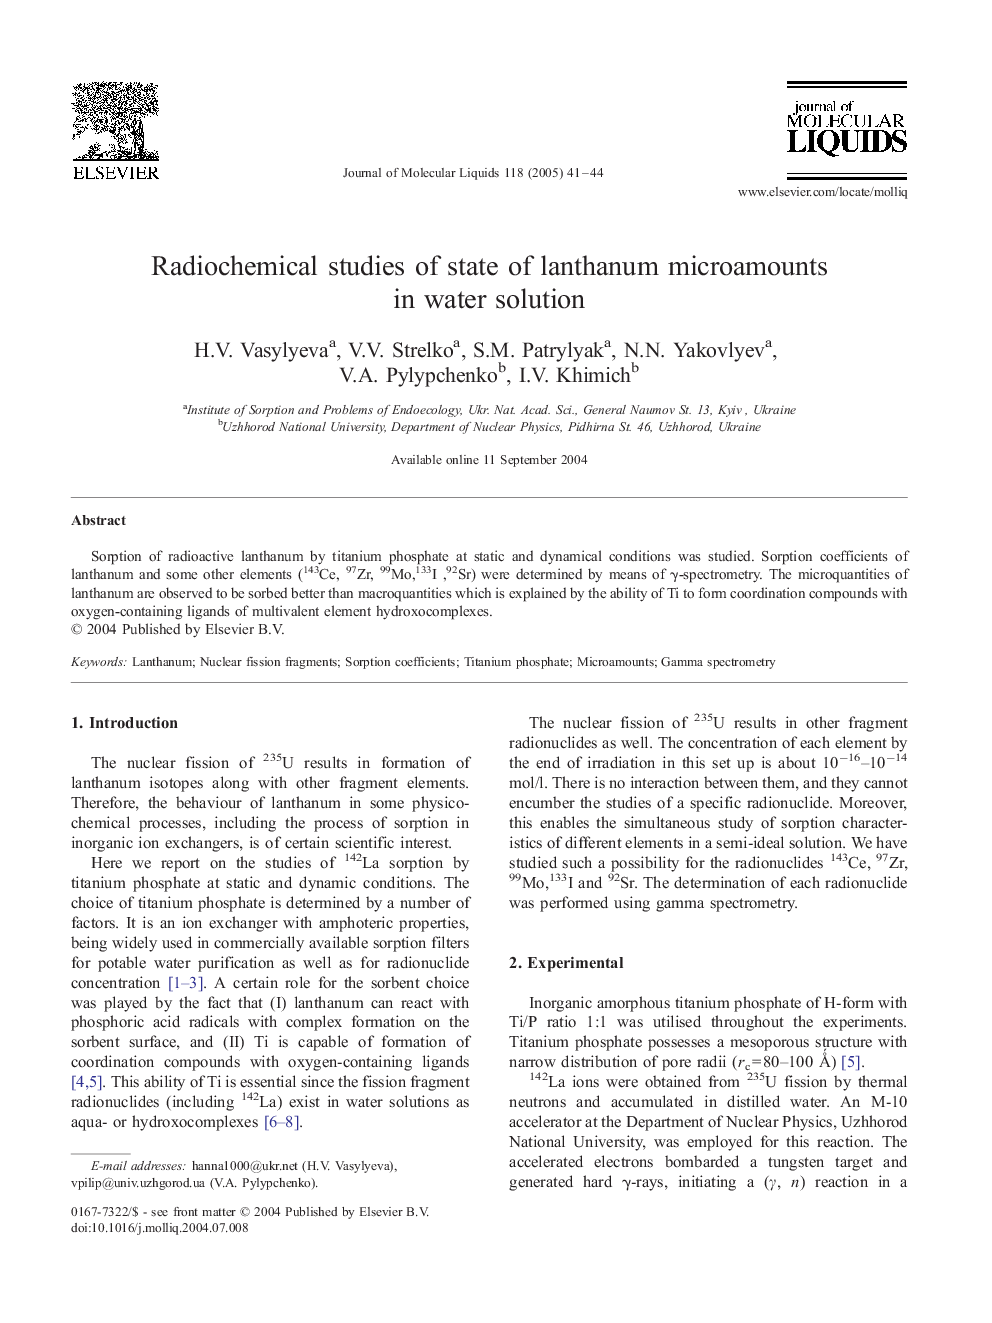 Radiochemical studies of state of lanthanum microamounts in water solution